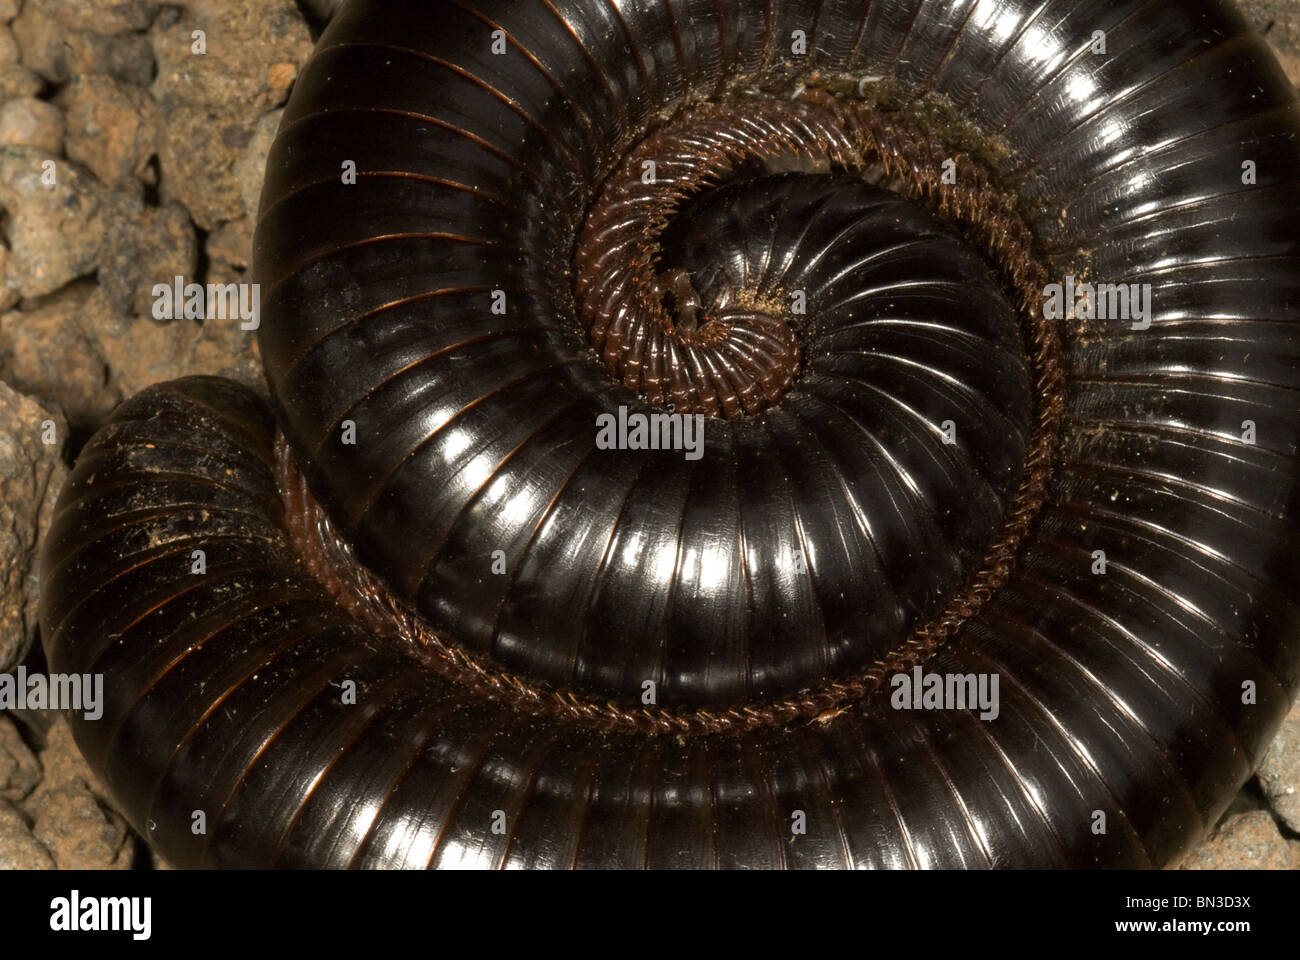 Close up of African giant millipede (Archispirostreptus gigas) Stock Photo